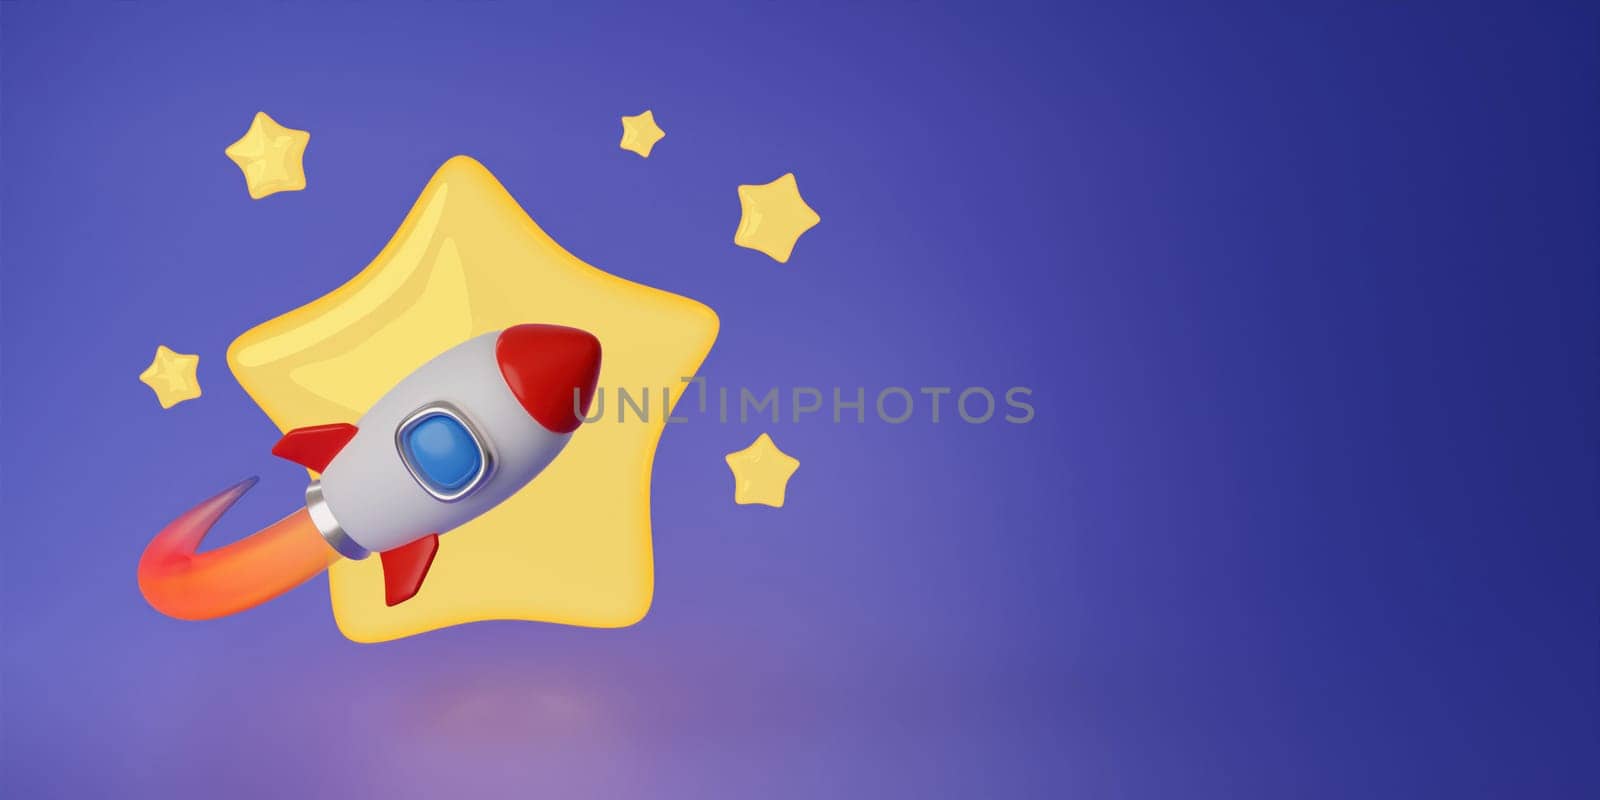 3d Rocket takes off in the starry sky - Space exploring concept. 3d design of Rocket launching on the space mission or tourism in cartoon minimal style. 3d render illustration.